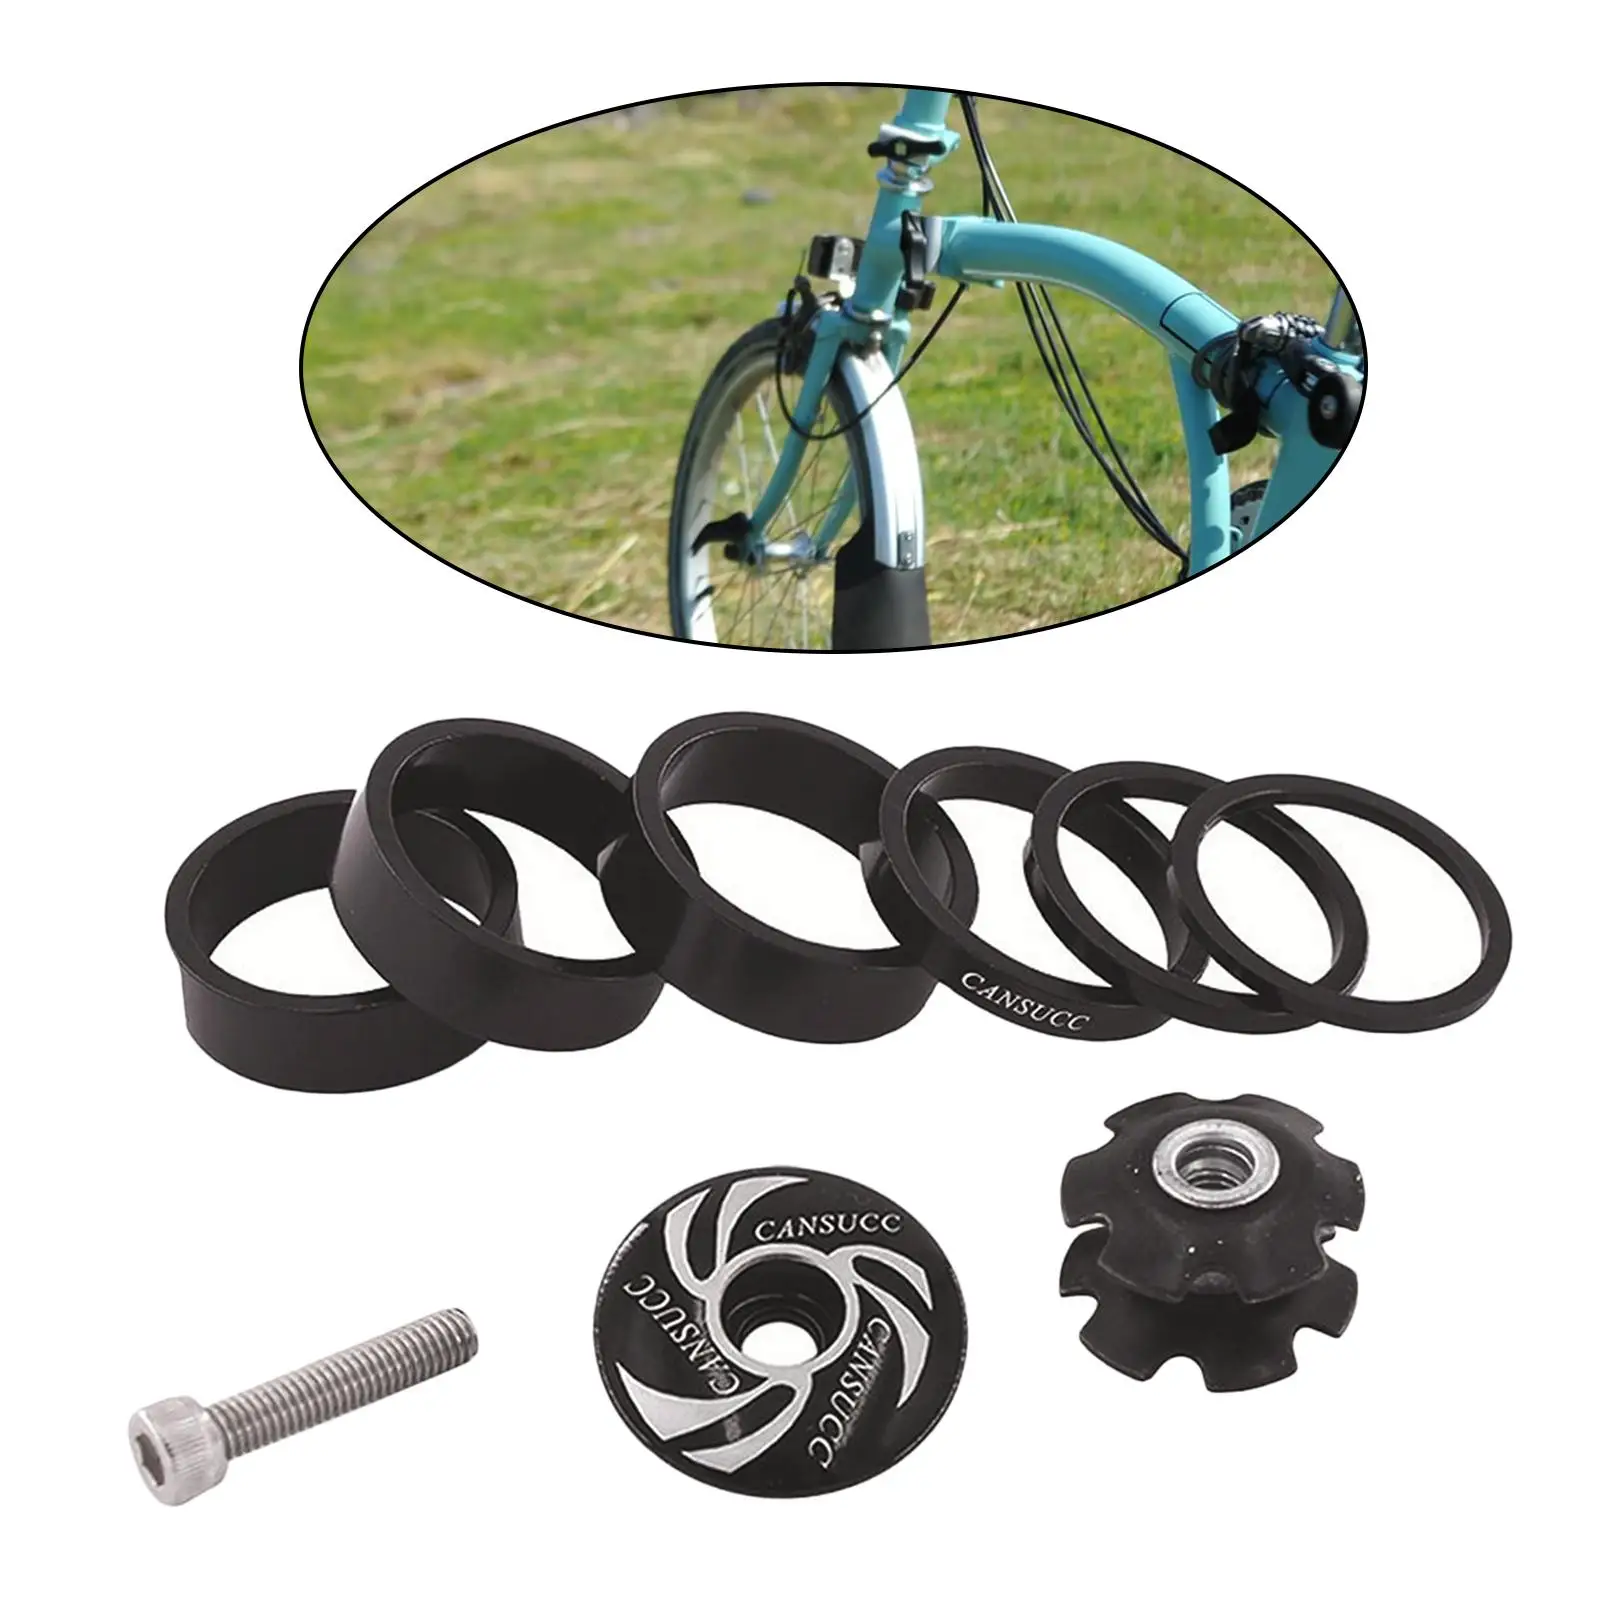 1 1/8 Inch Bicycle Headset Spacer with Headset Top   Headset  Set